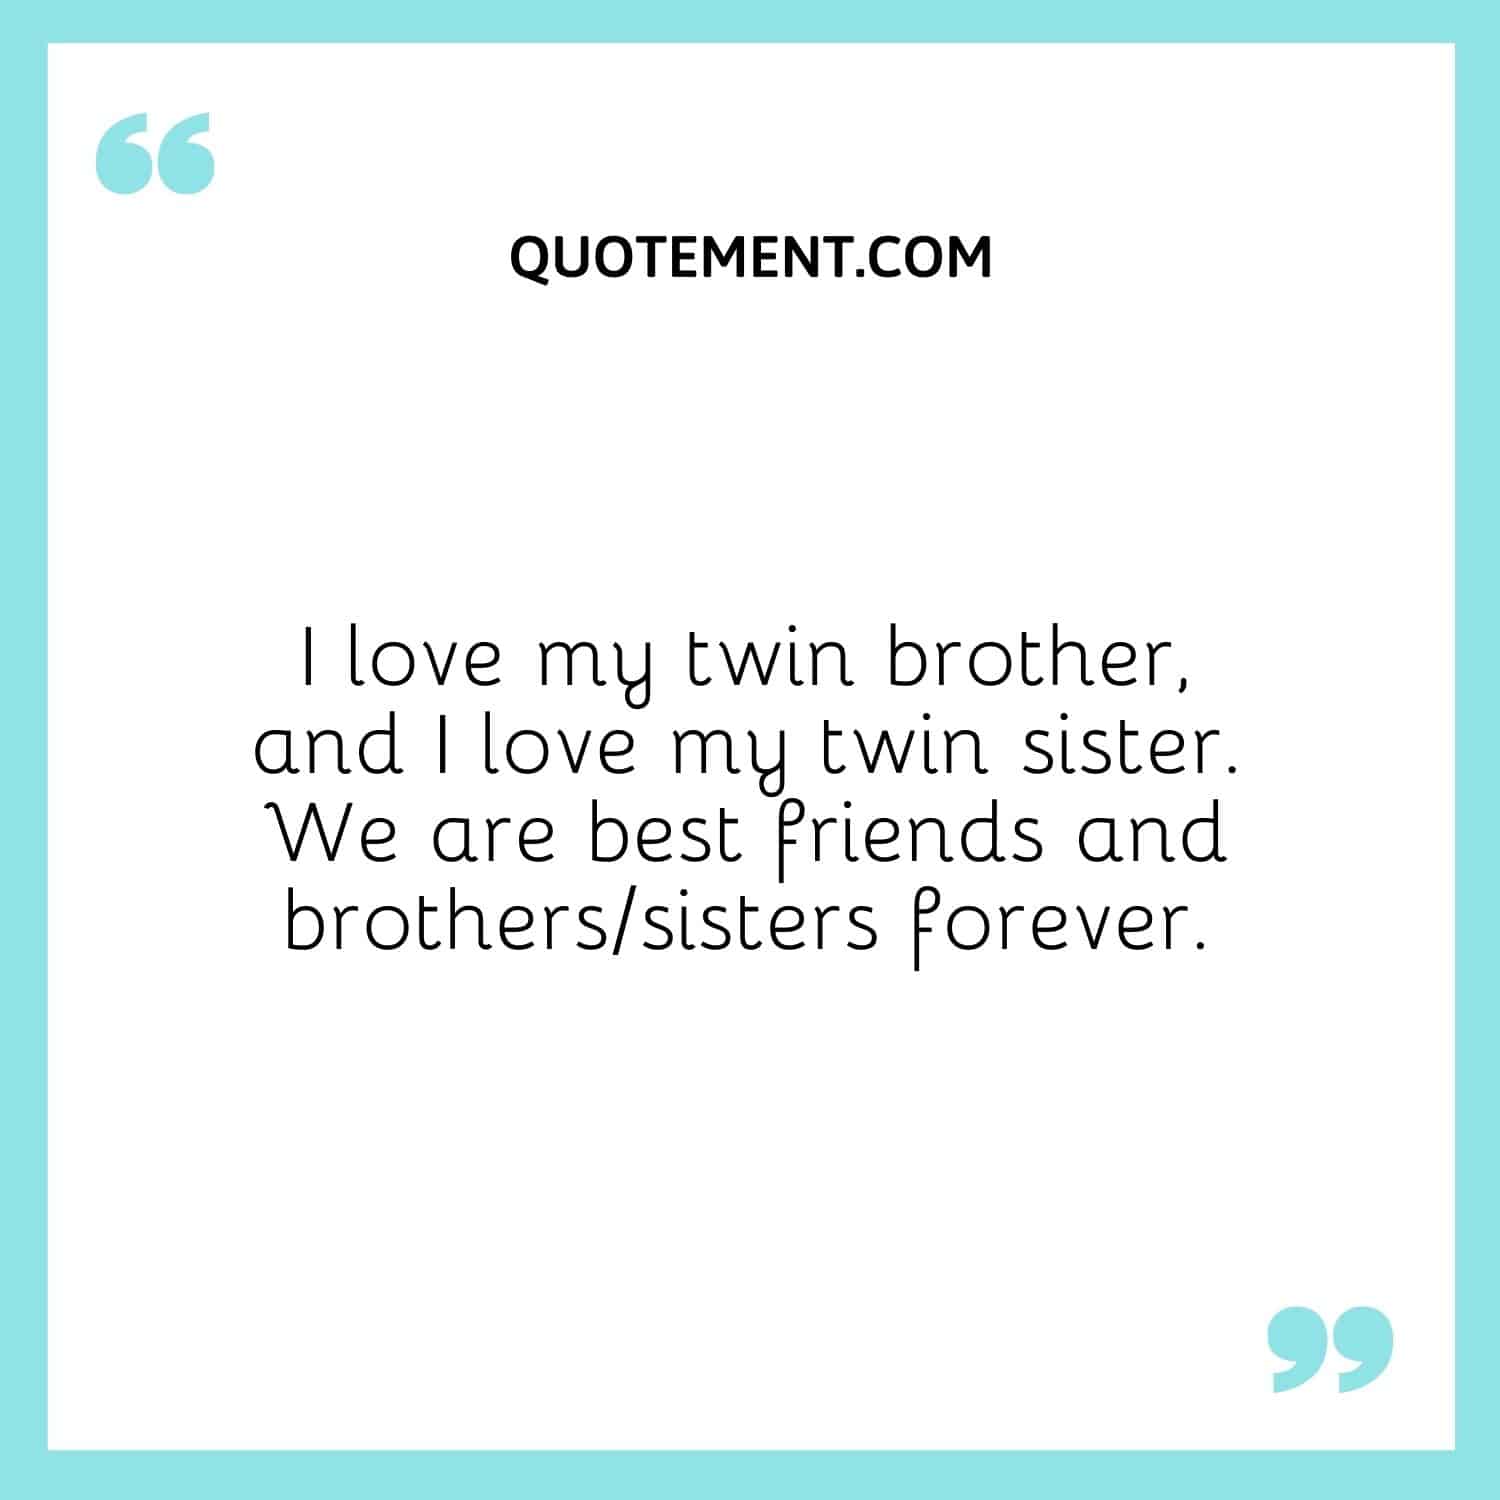 I love my twin brother, and I love my twin sister.